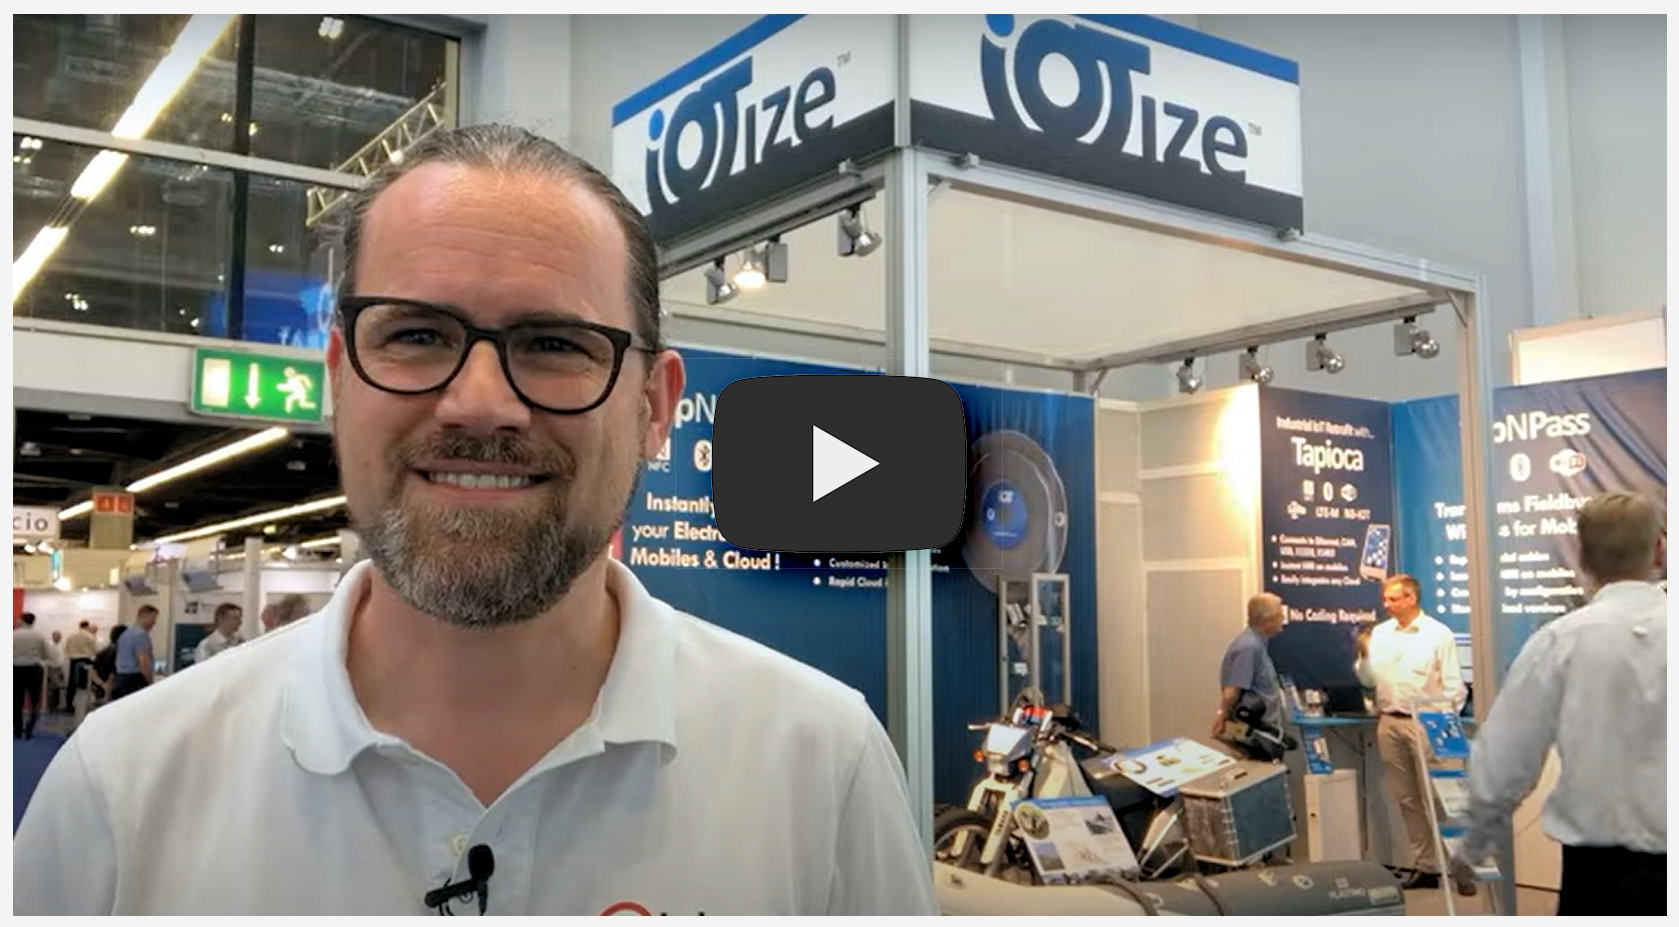 Embedded World IoTize Value with Stuart Cording